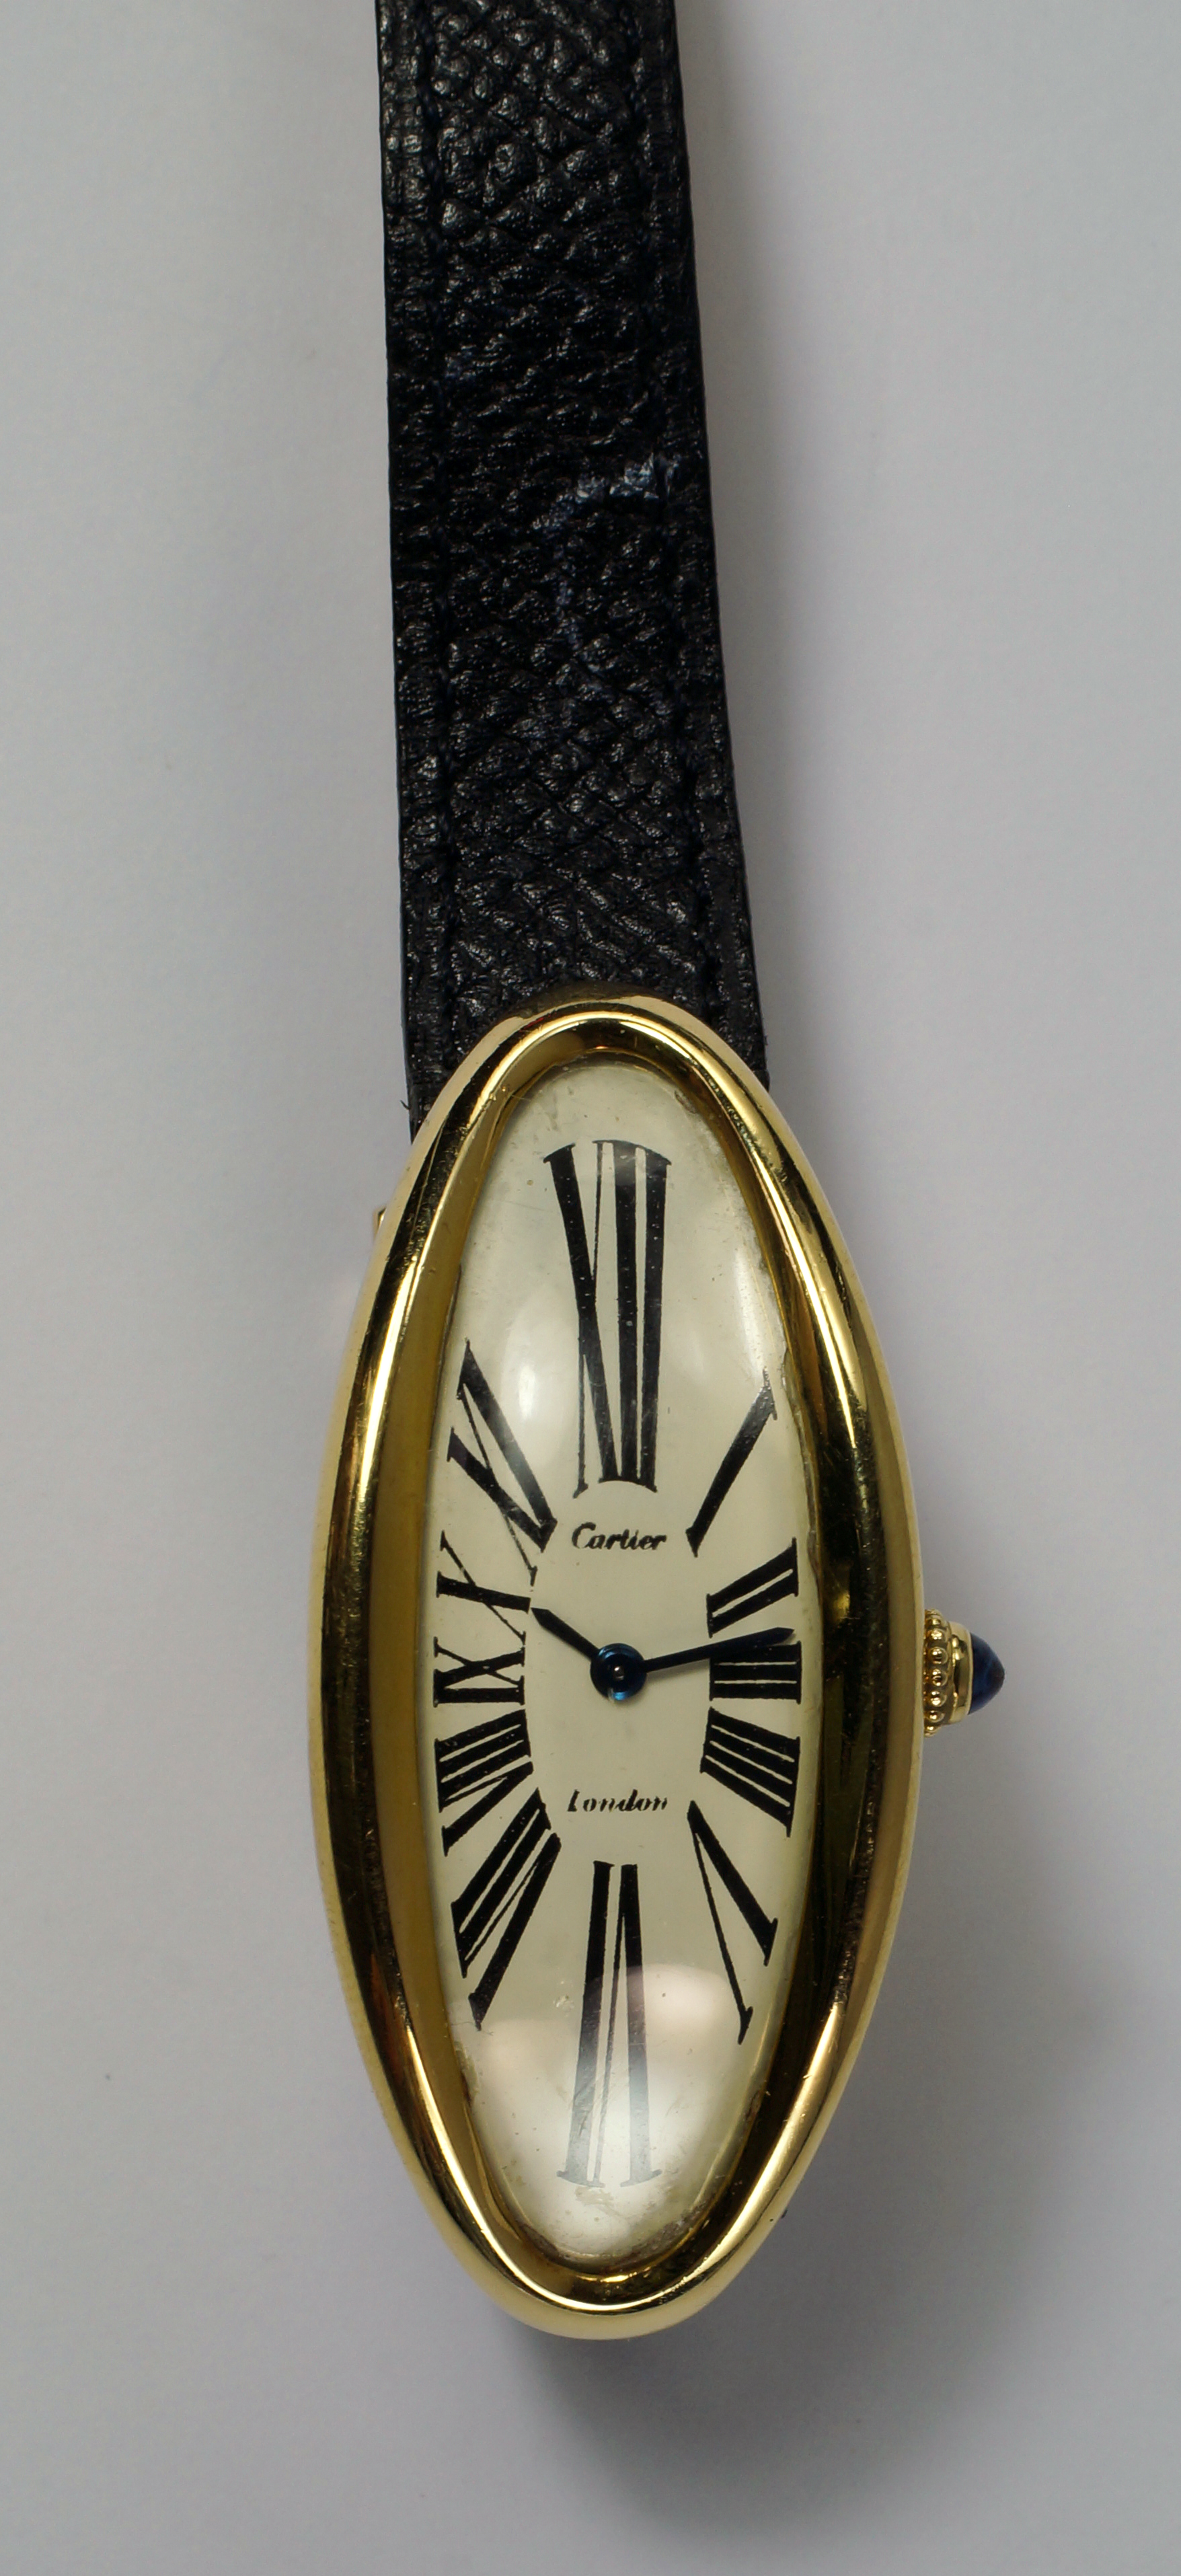 Cartier ladies wristwatch in 18K gold curved and elongated oval case, price realized: £18,450 ($28,354). Roseberys image